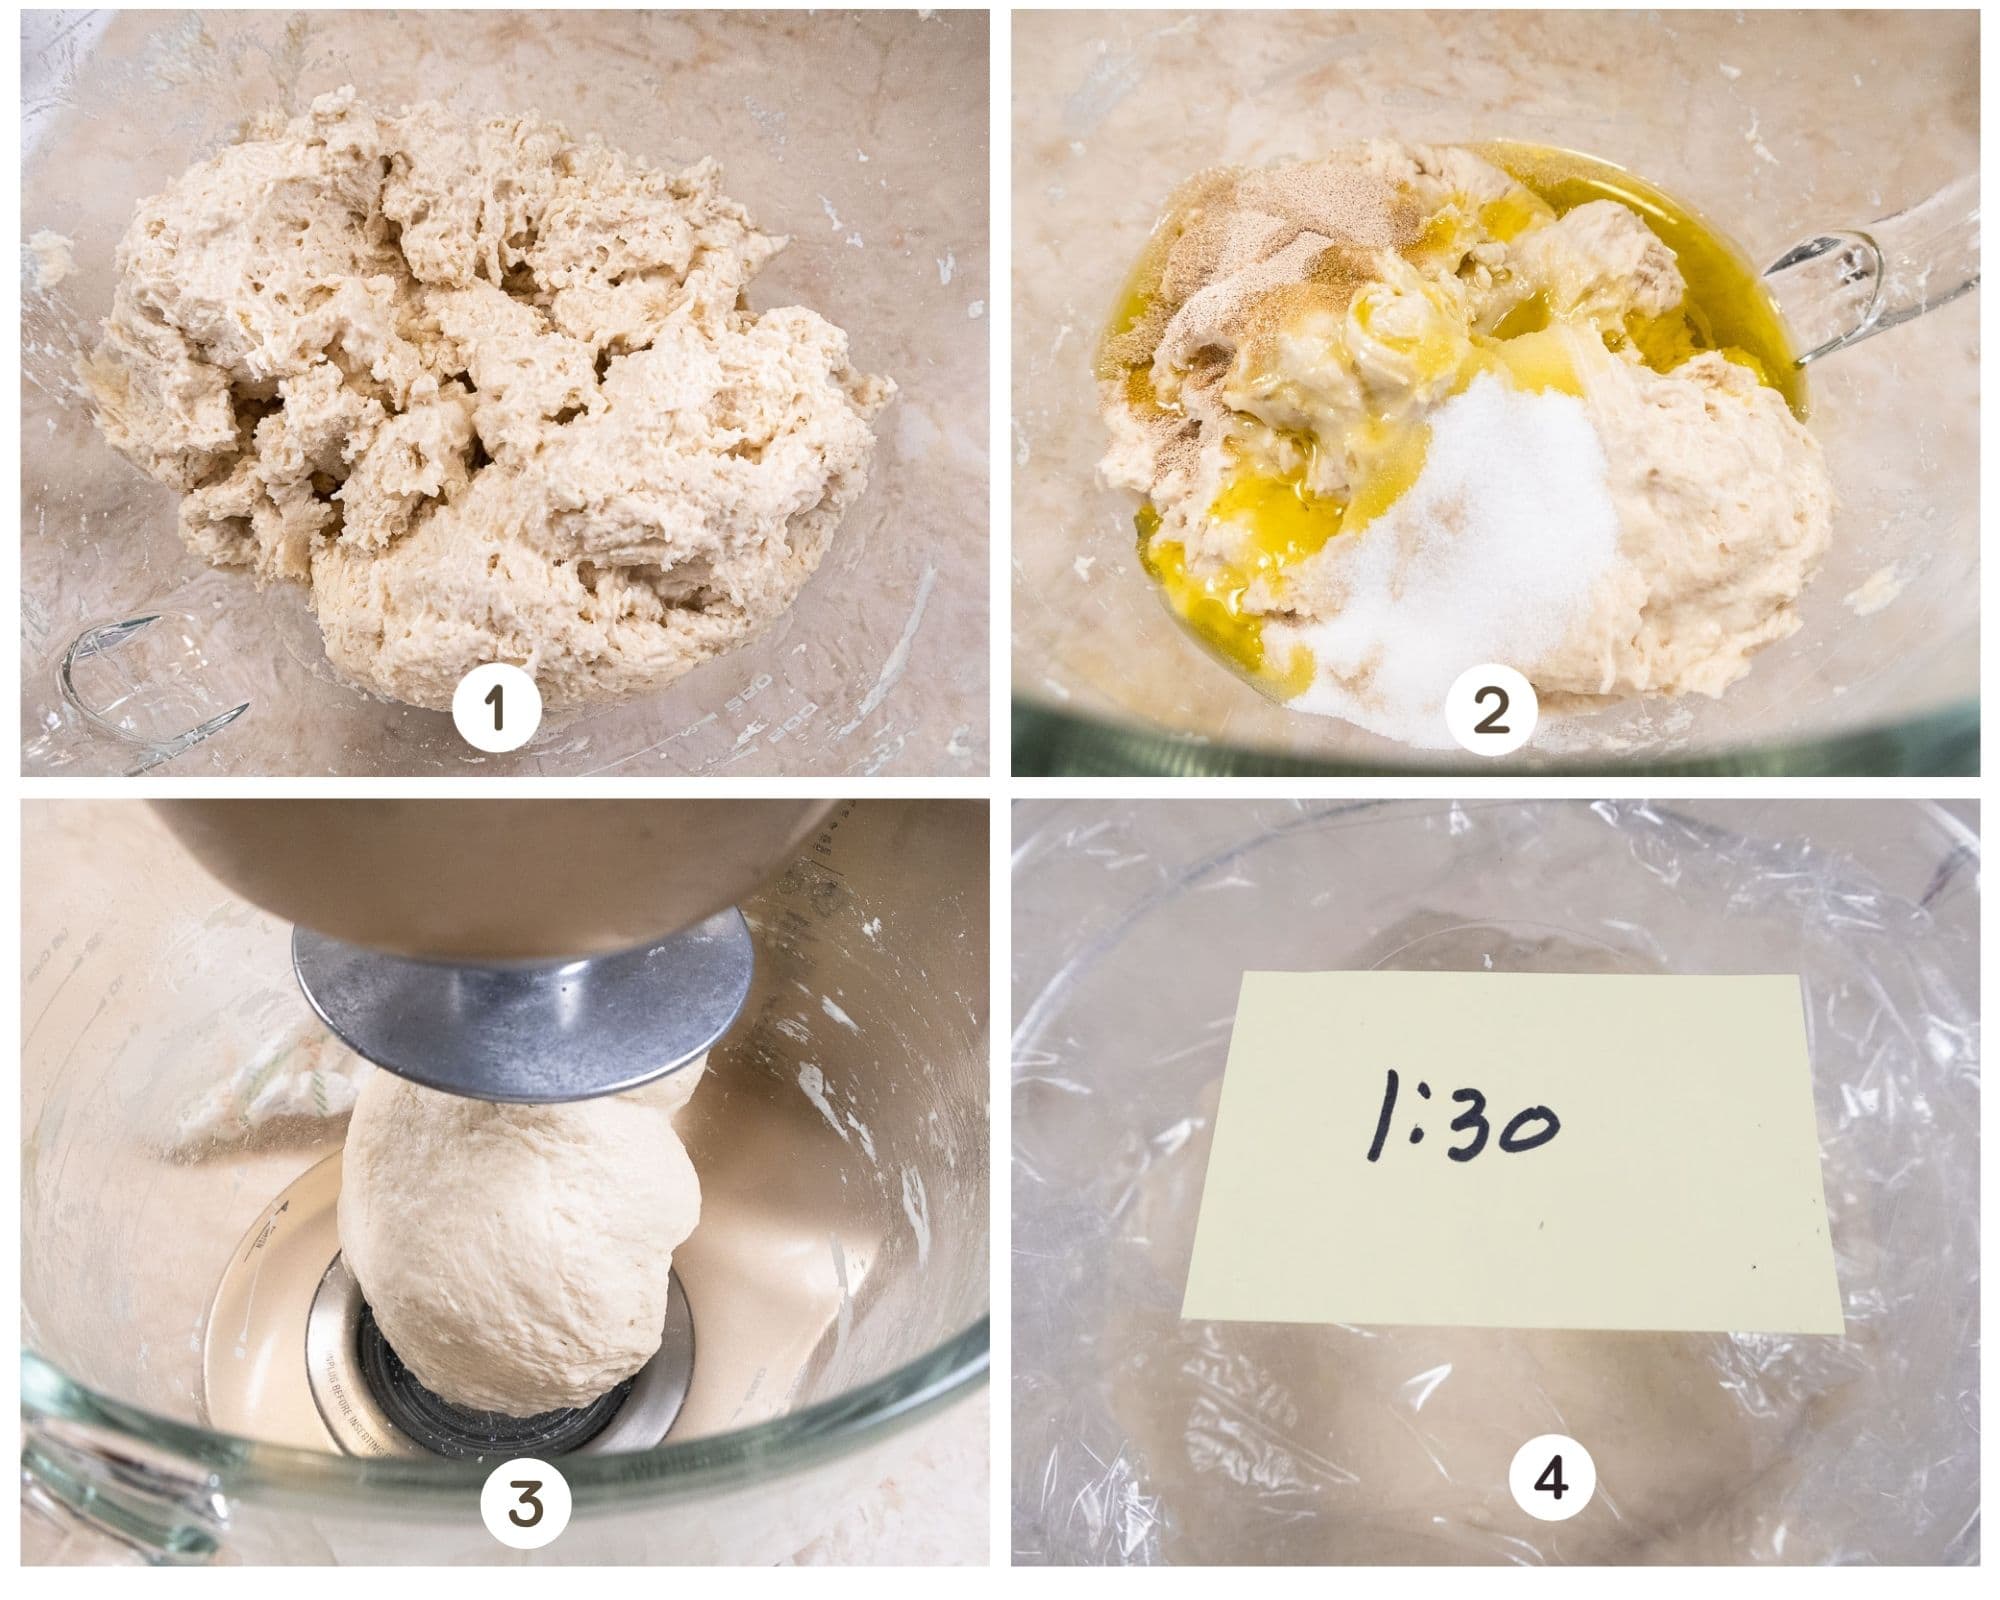 Collage of making the dough - flour and water, additional ingredients, mixing, rising.